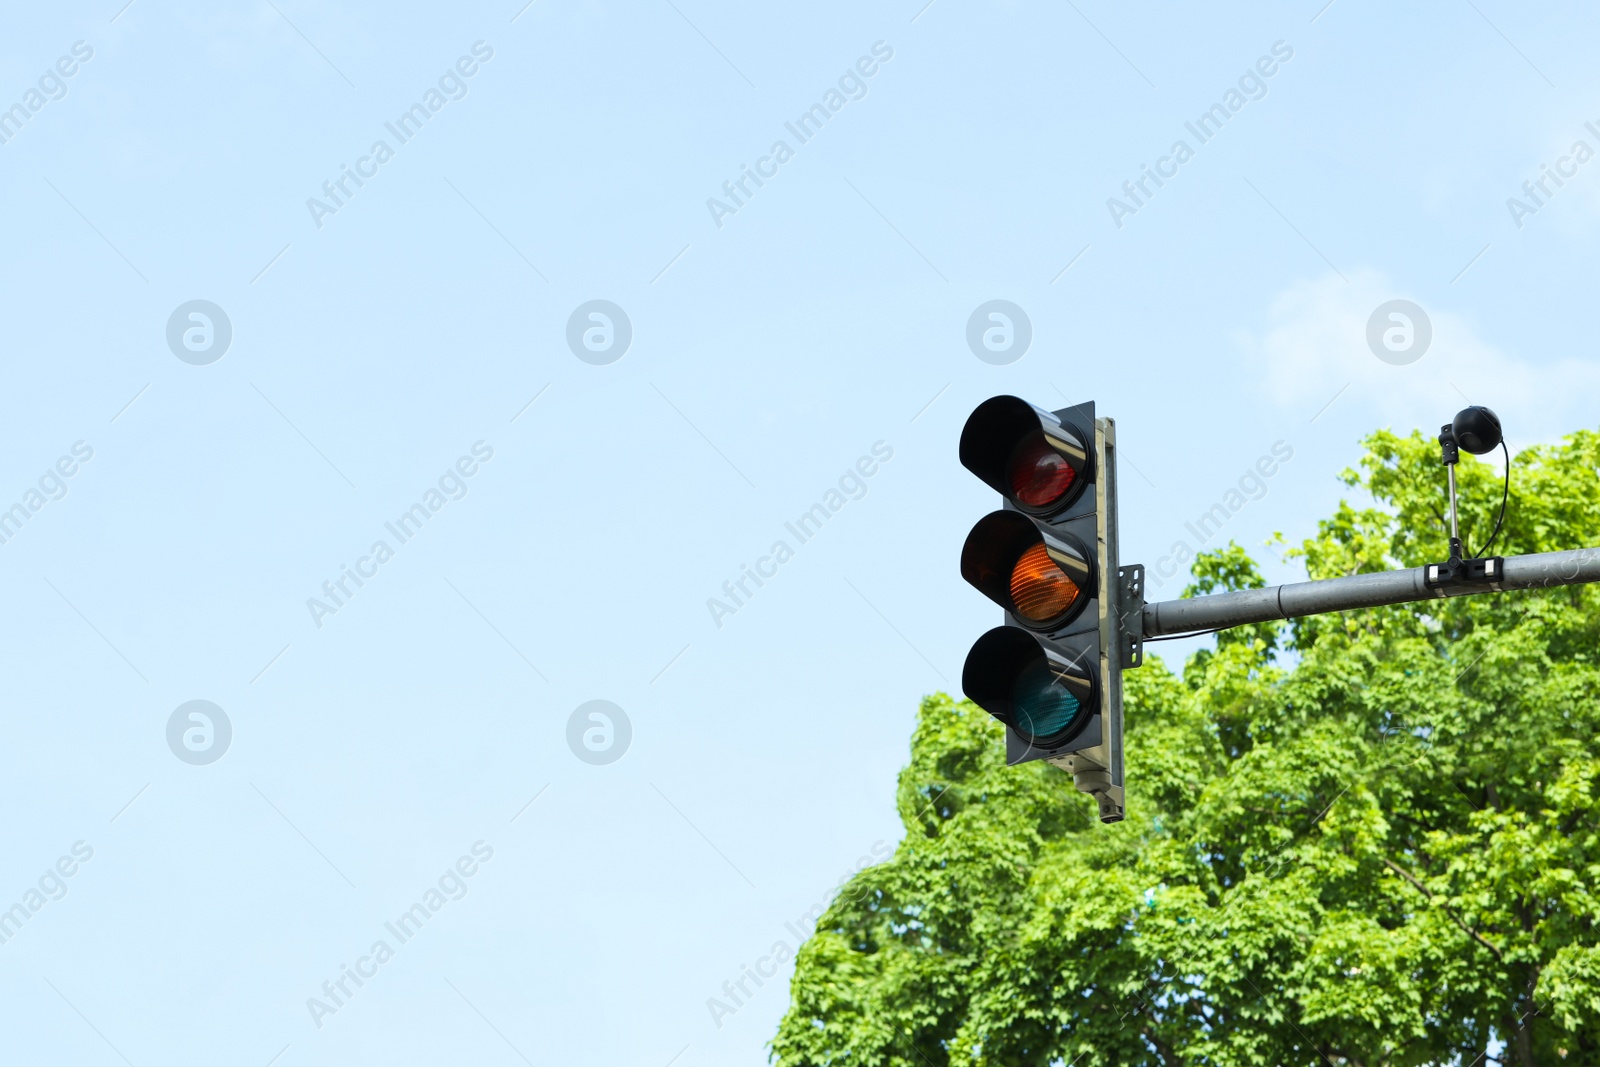 Photo of Traffic light near trees against cloudy sky